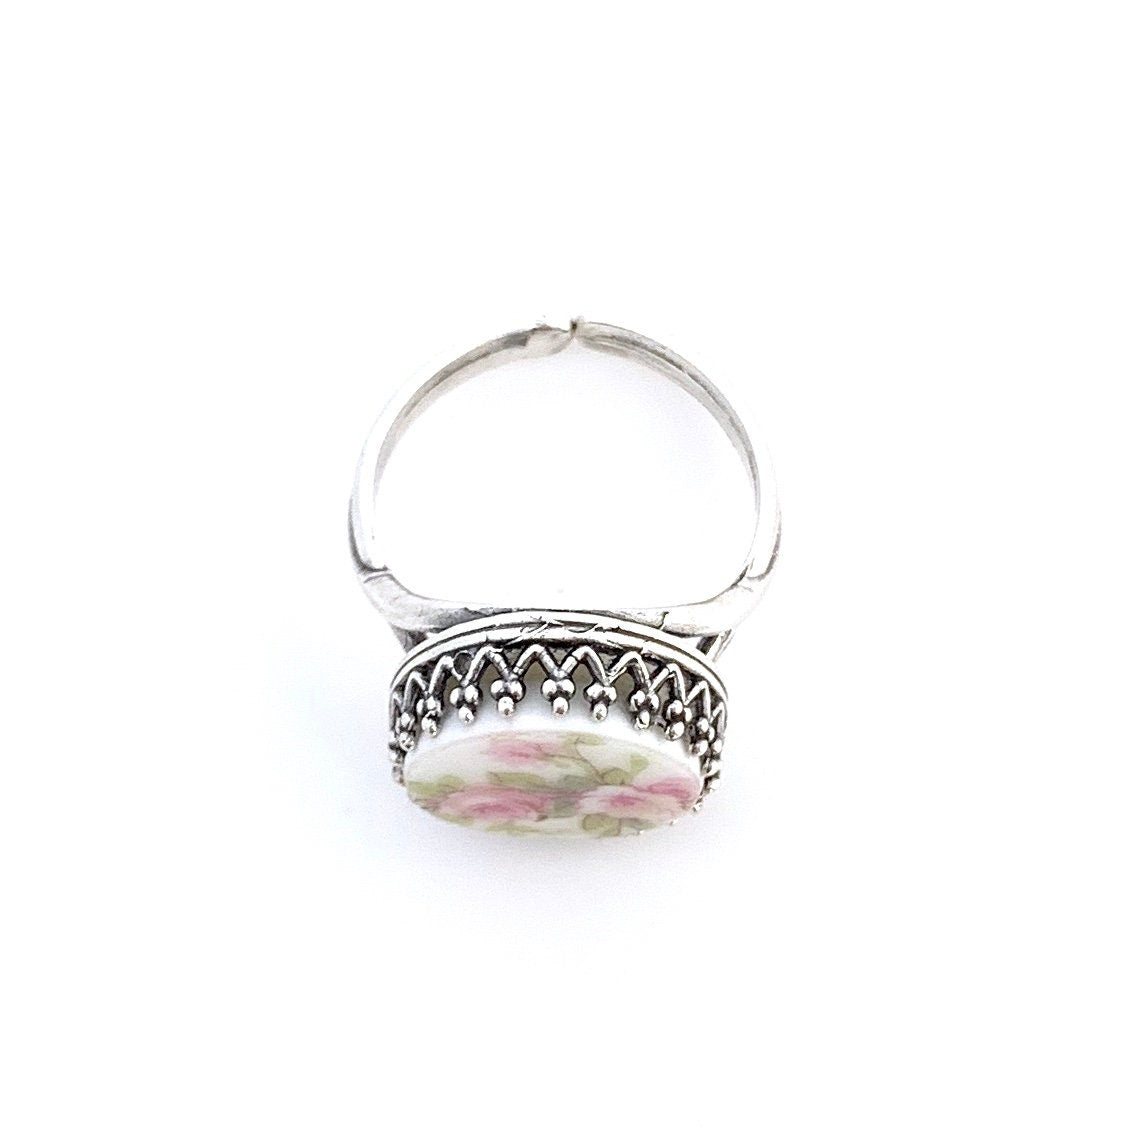 Victorian China Ring, Antique French Limoges Broken China Jewelry, Pink Roses Ring, Gift for Girlfriend,